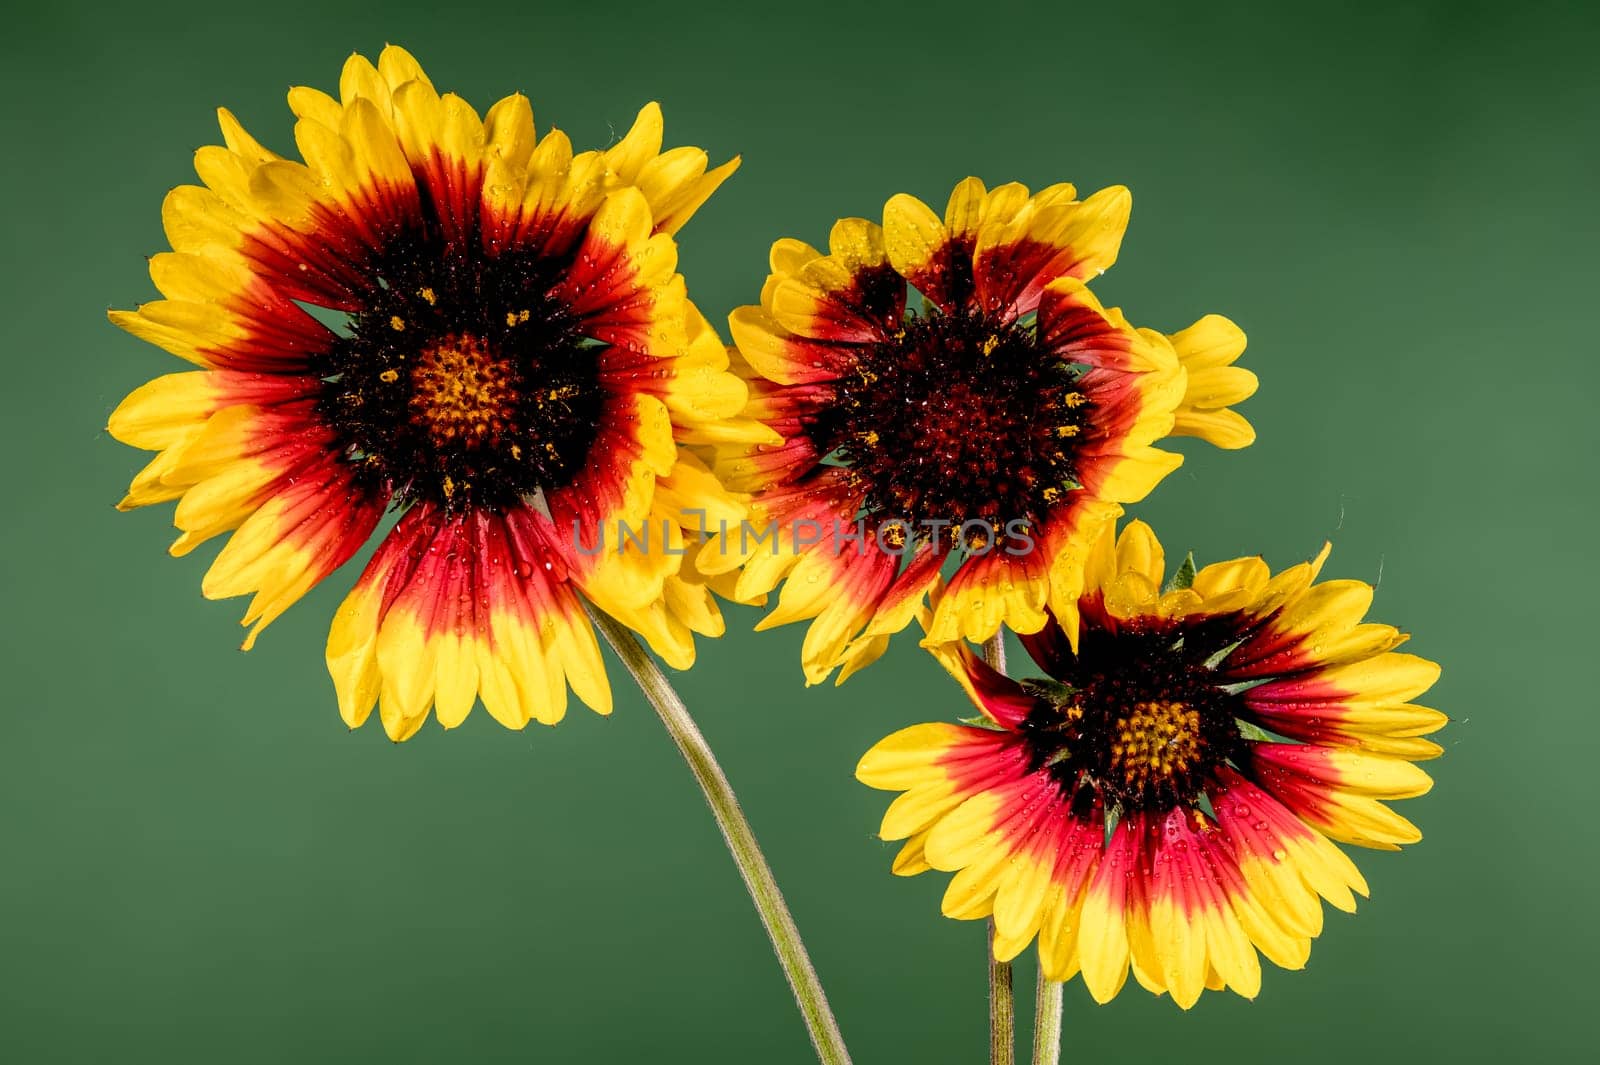 Beautiful Blooming red Gaillardia or blanket flower on a green background. Flower head close-up.